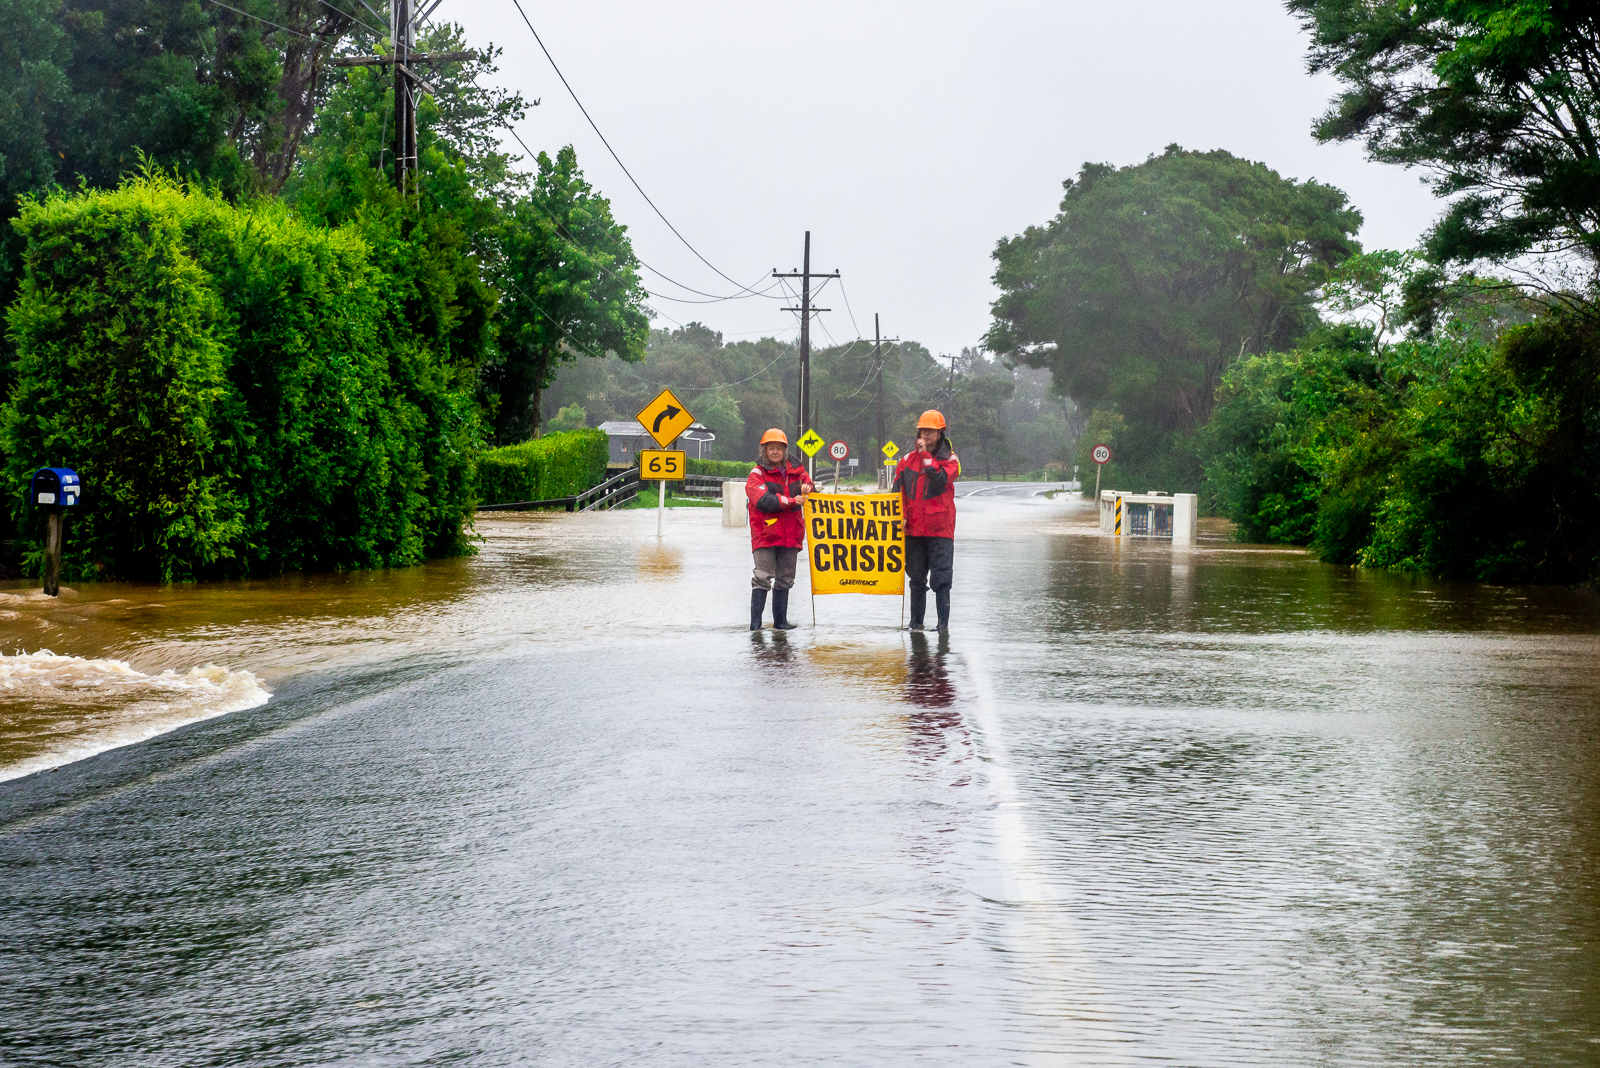 Two people stand in the middle of a road with the surface underwater. The have red jackets and hardhats. They hold a banner saying This is the climate crisis